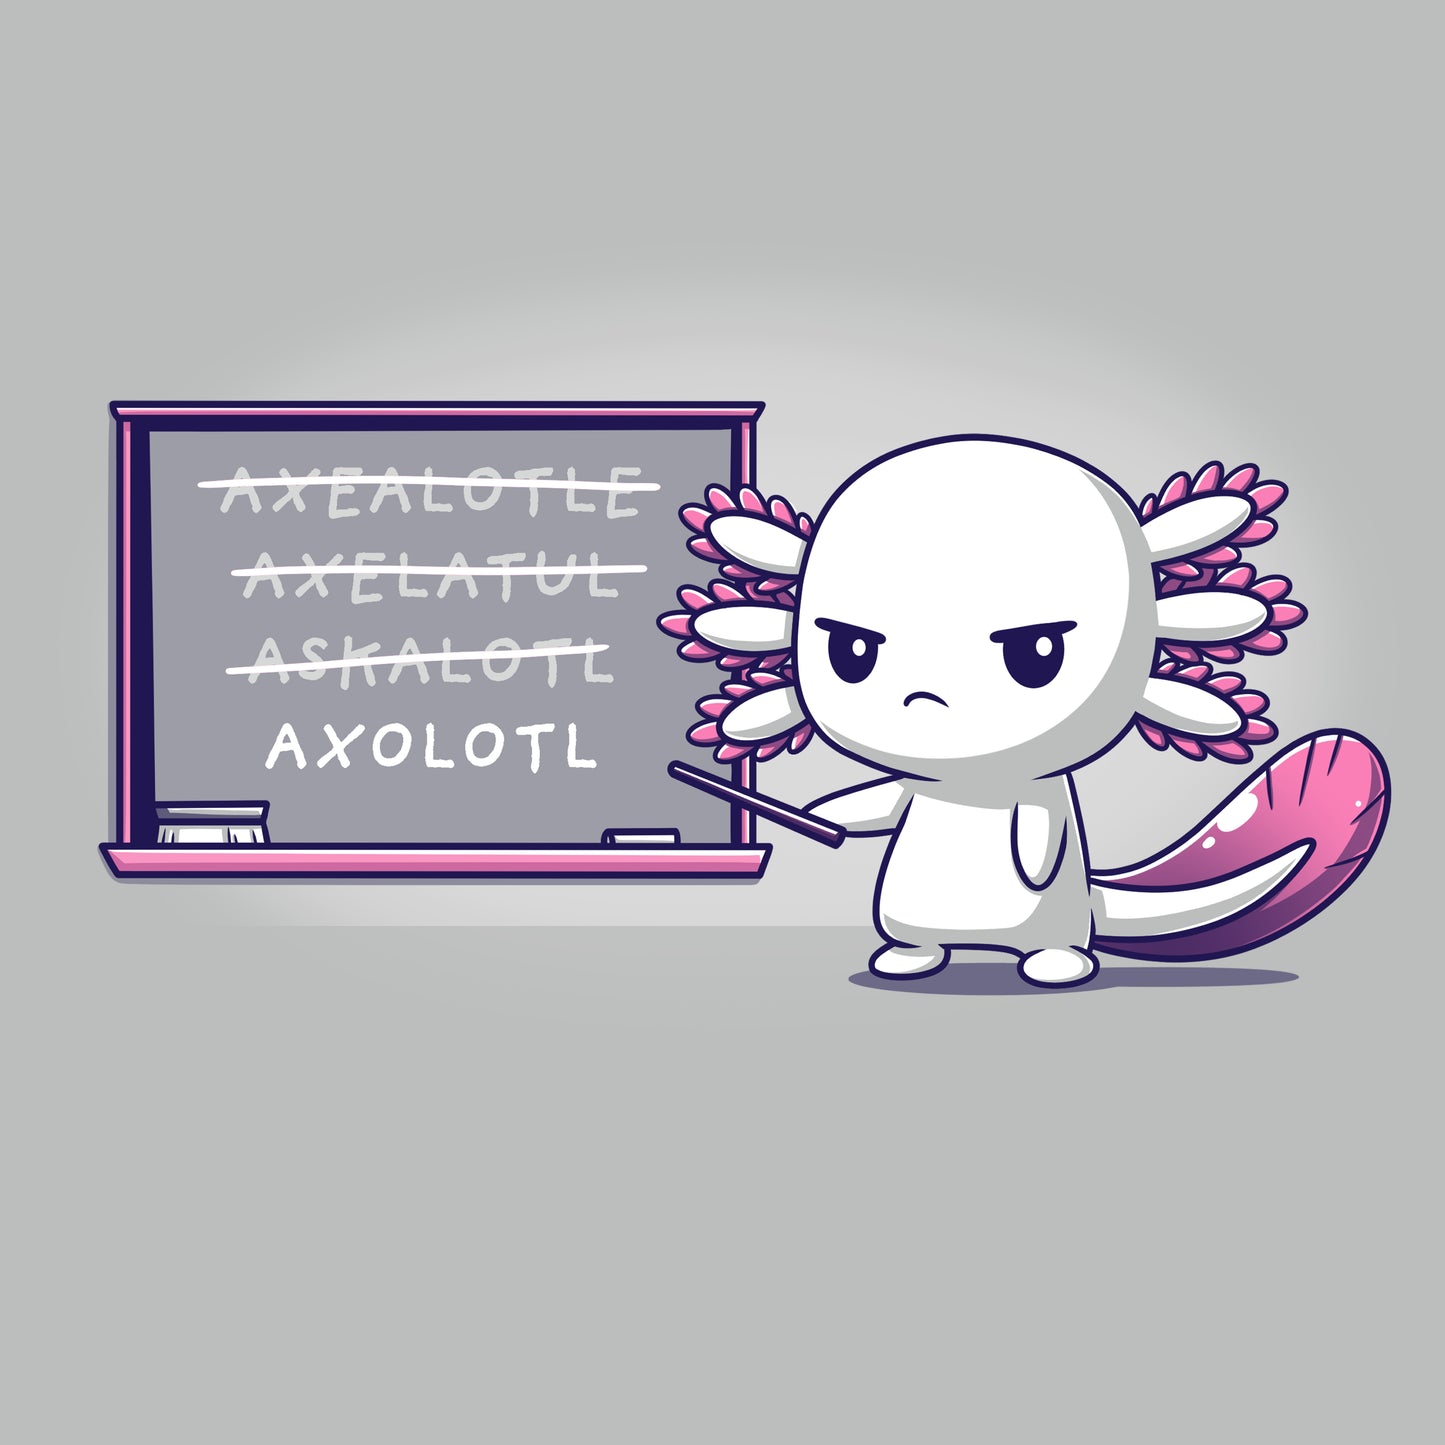 A cartoon axolotl stands in front of a chalkboard for an "Axolotl Lesson," pointing at the correctly spelled word, while several incorrect spellings are crossed out. The axolotl is adorably dressed in a silver t-shirt made from super soft ringspun cotton from monsterdigital.